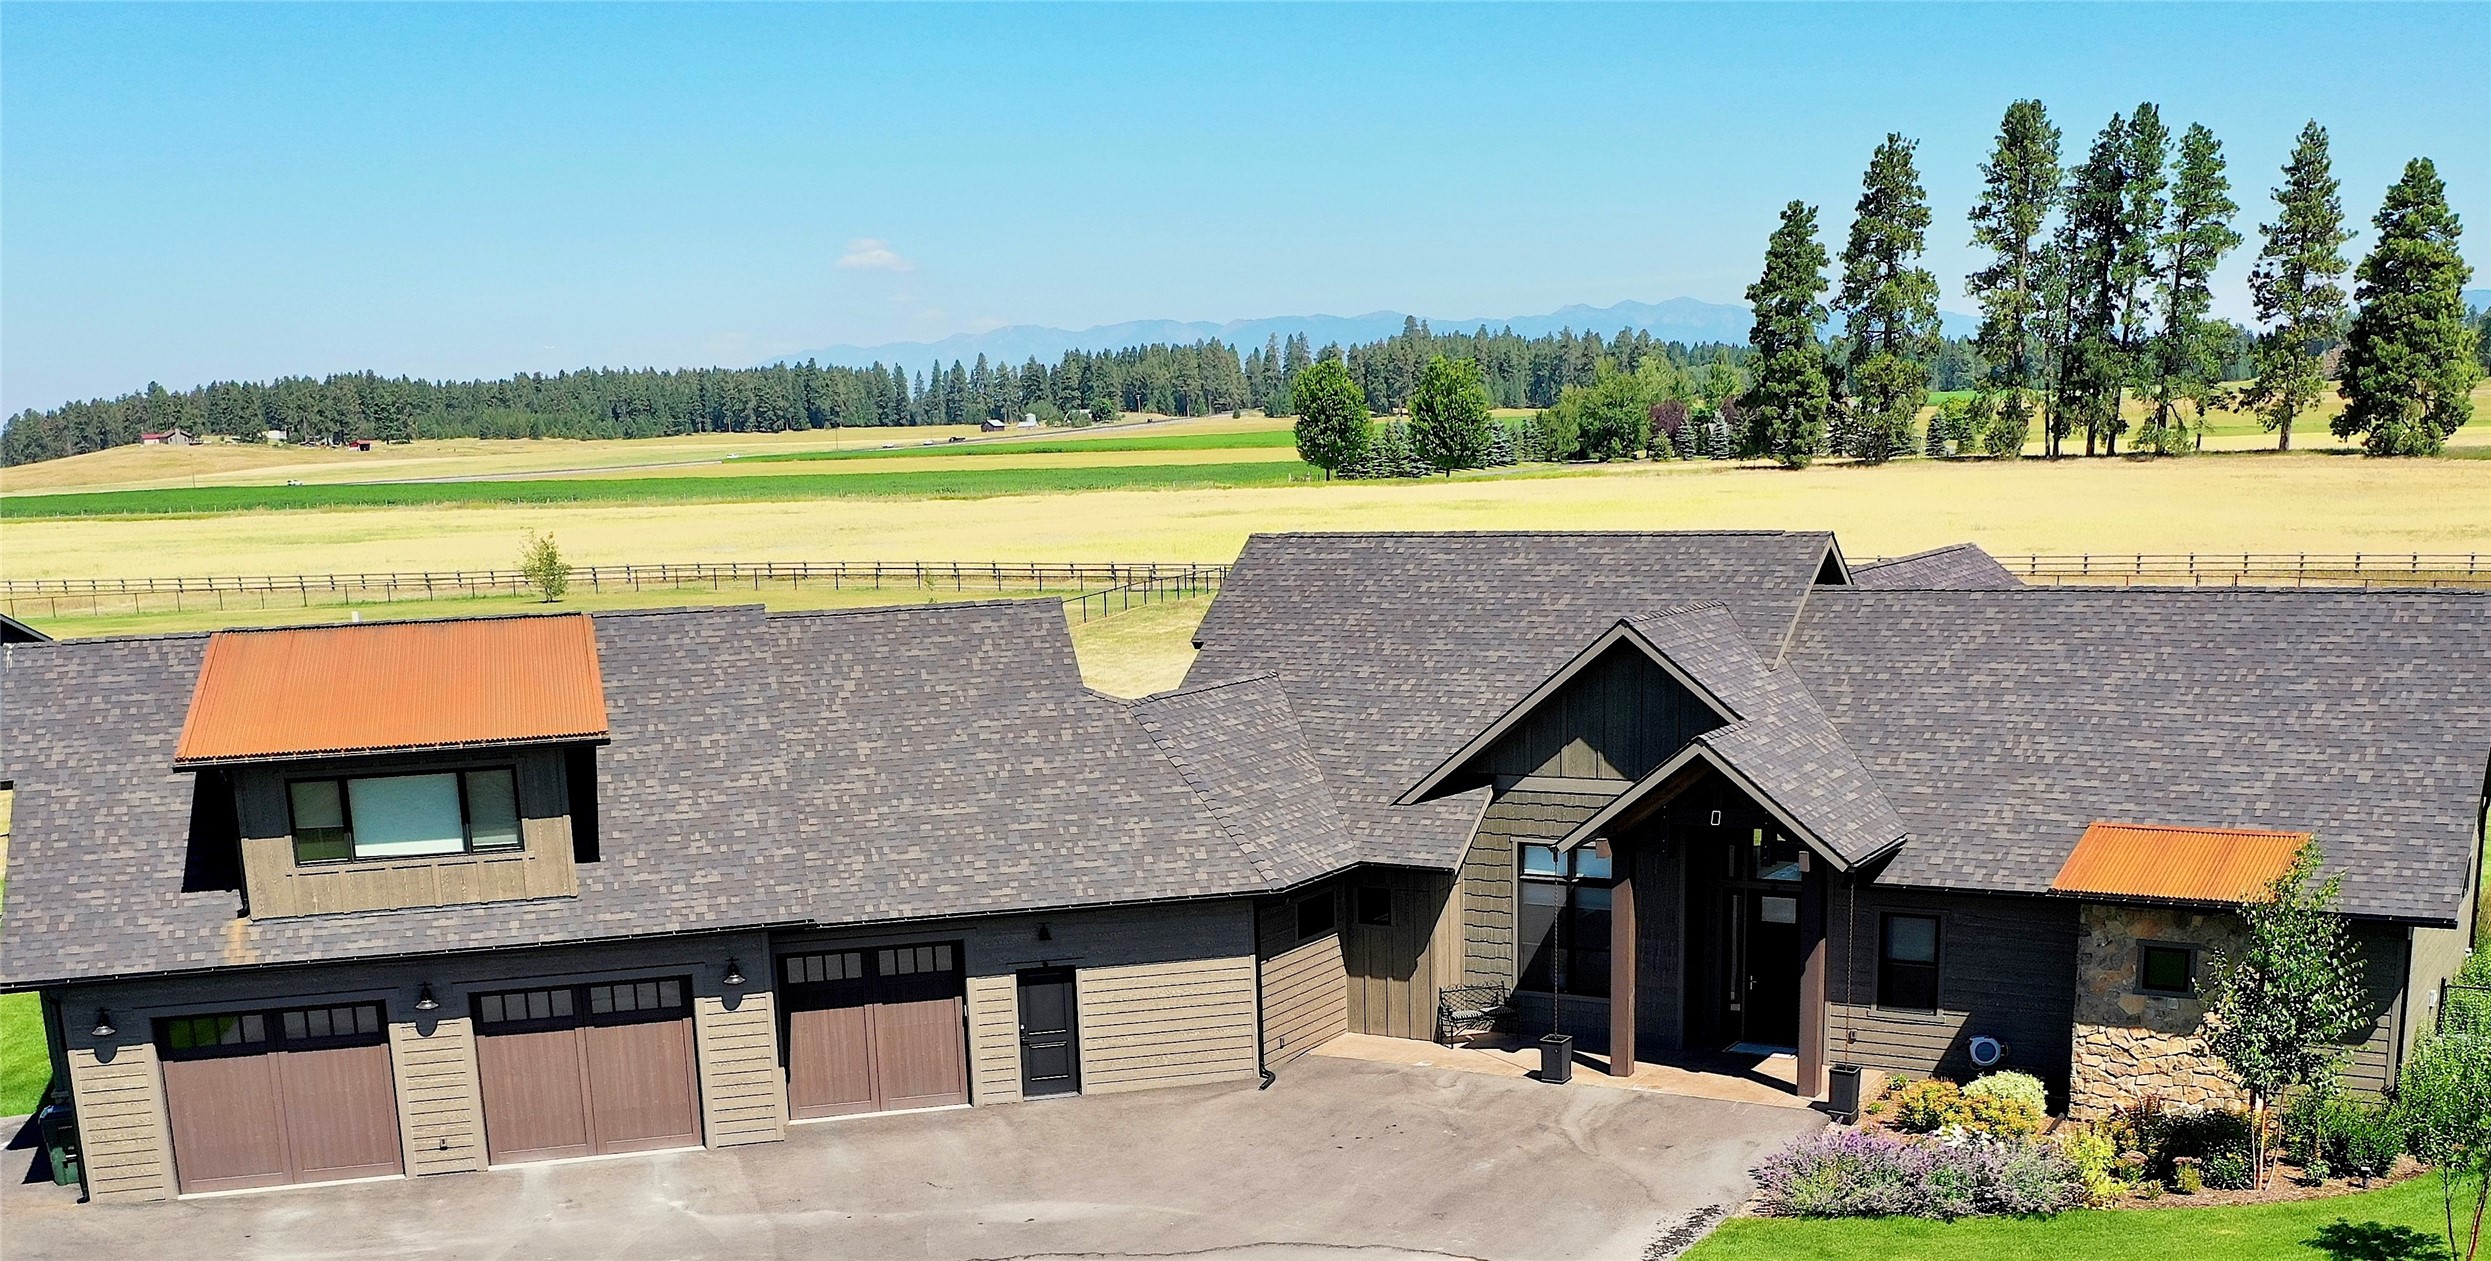 Breathtaking 360 views surround this gorgeous Montana Custom Home on 2.21 ac. located in the coveted Sweetgrass Ranch Subdivision. 
This Custom 2021 Home has 3,301 sqft of living space with high-end amenities. A 1,045 sqft one-bedroom apt, with a separate entrance, is above the oversized, heated 3-car garage. This open floor plan is a 3 Bed, 2.5 Bath, w/custom office, flex room, & a large bonus/rec room. A gas stone fireplace enhances the living area with slider doors that open 8 ft to the LG covered patio. Enjoy the magic of MT with outdoor entertaining, and relax with incredible sunsets while taking in the Columbia, Swan, and Big Mountain views. Vaulted fir beam ceilings, dining area, gourmet kitchen. Private Primary Suite with tiled walk-in shower, dual sinks, and 2 custom closets. Conveniently close to Kalispell shopping, and surrounding towns. Close to Glacier Park, Flathead River Access, and GNA Airport. Call Tricia Weimer at 406-890-3426 or your Real Estate Professional.